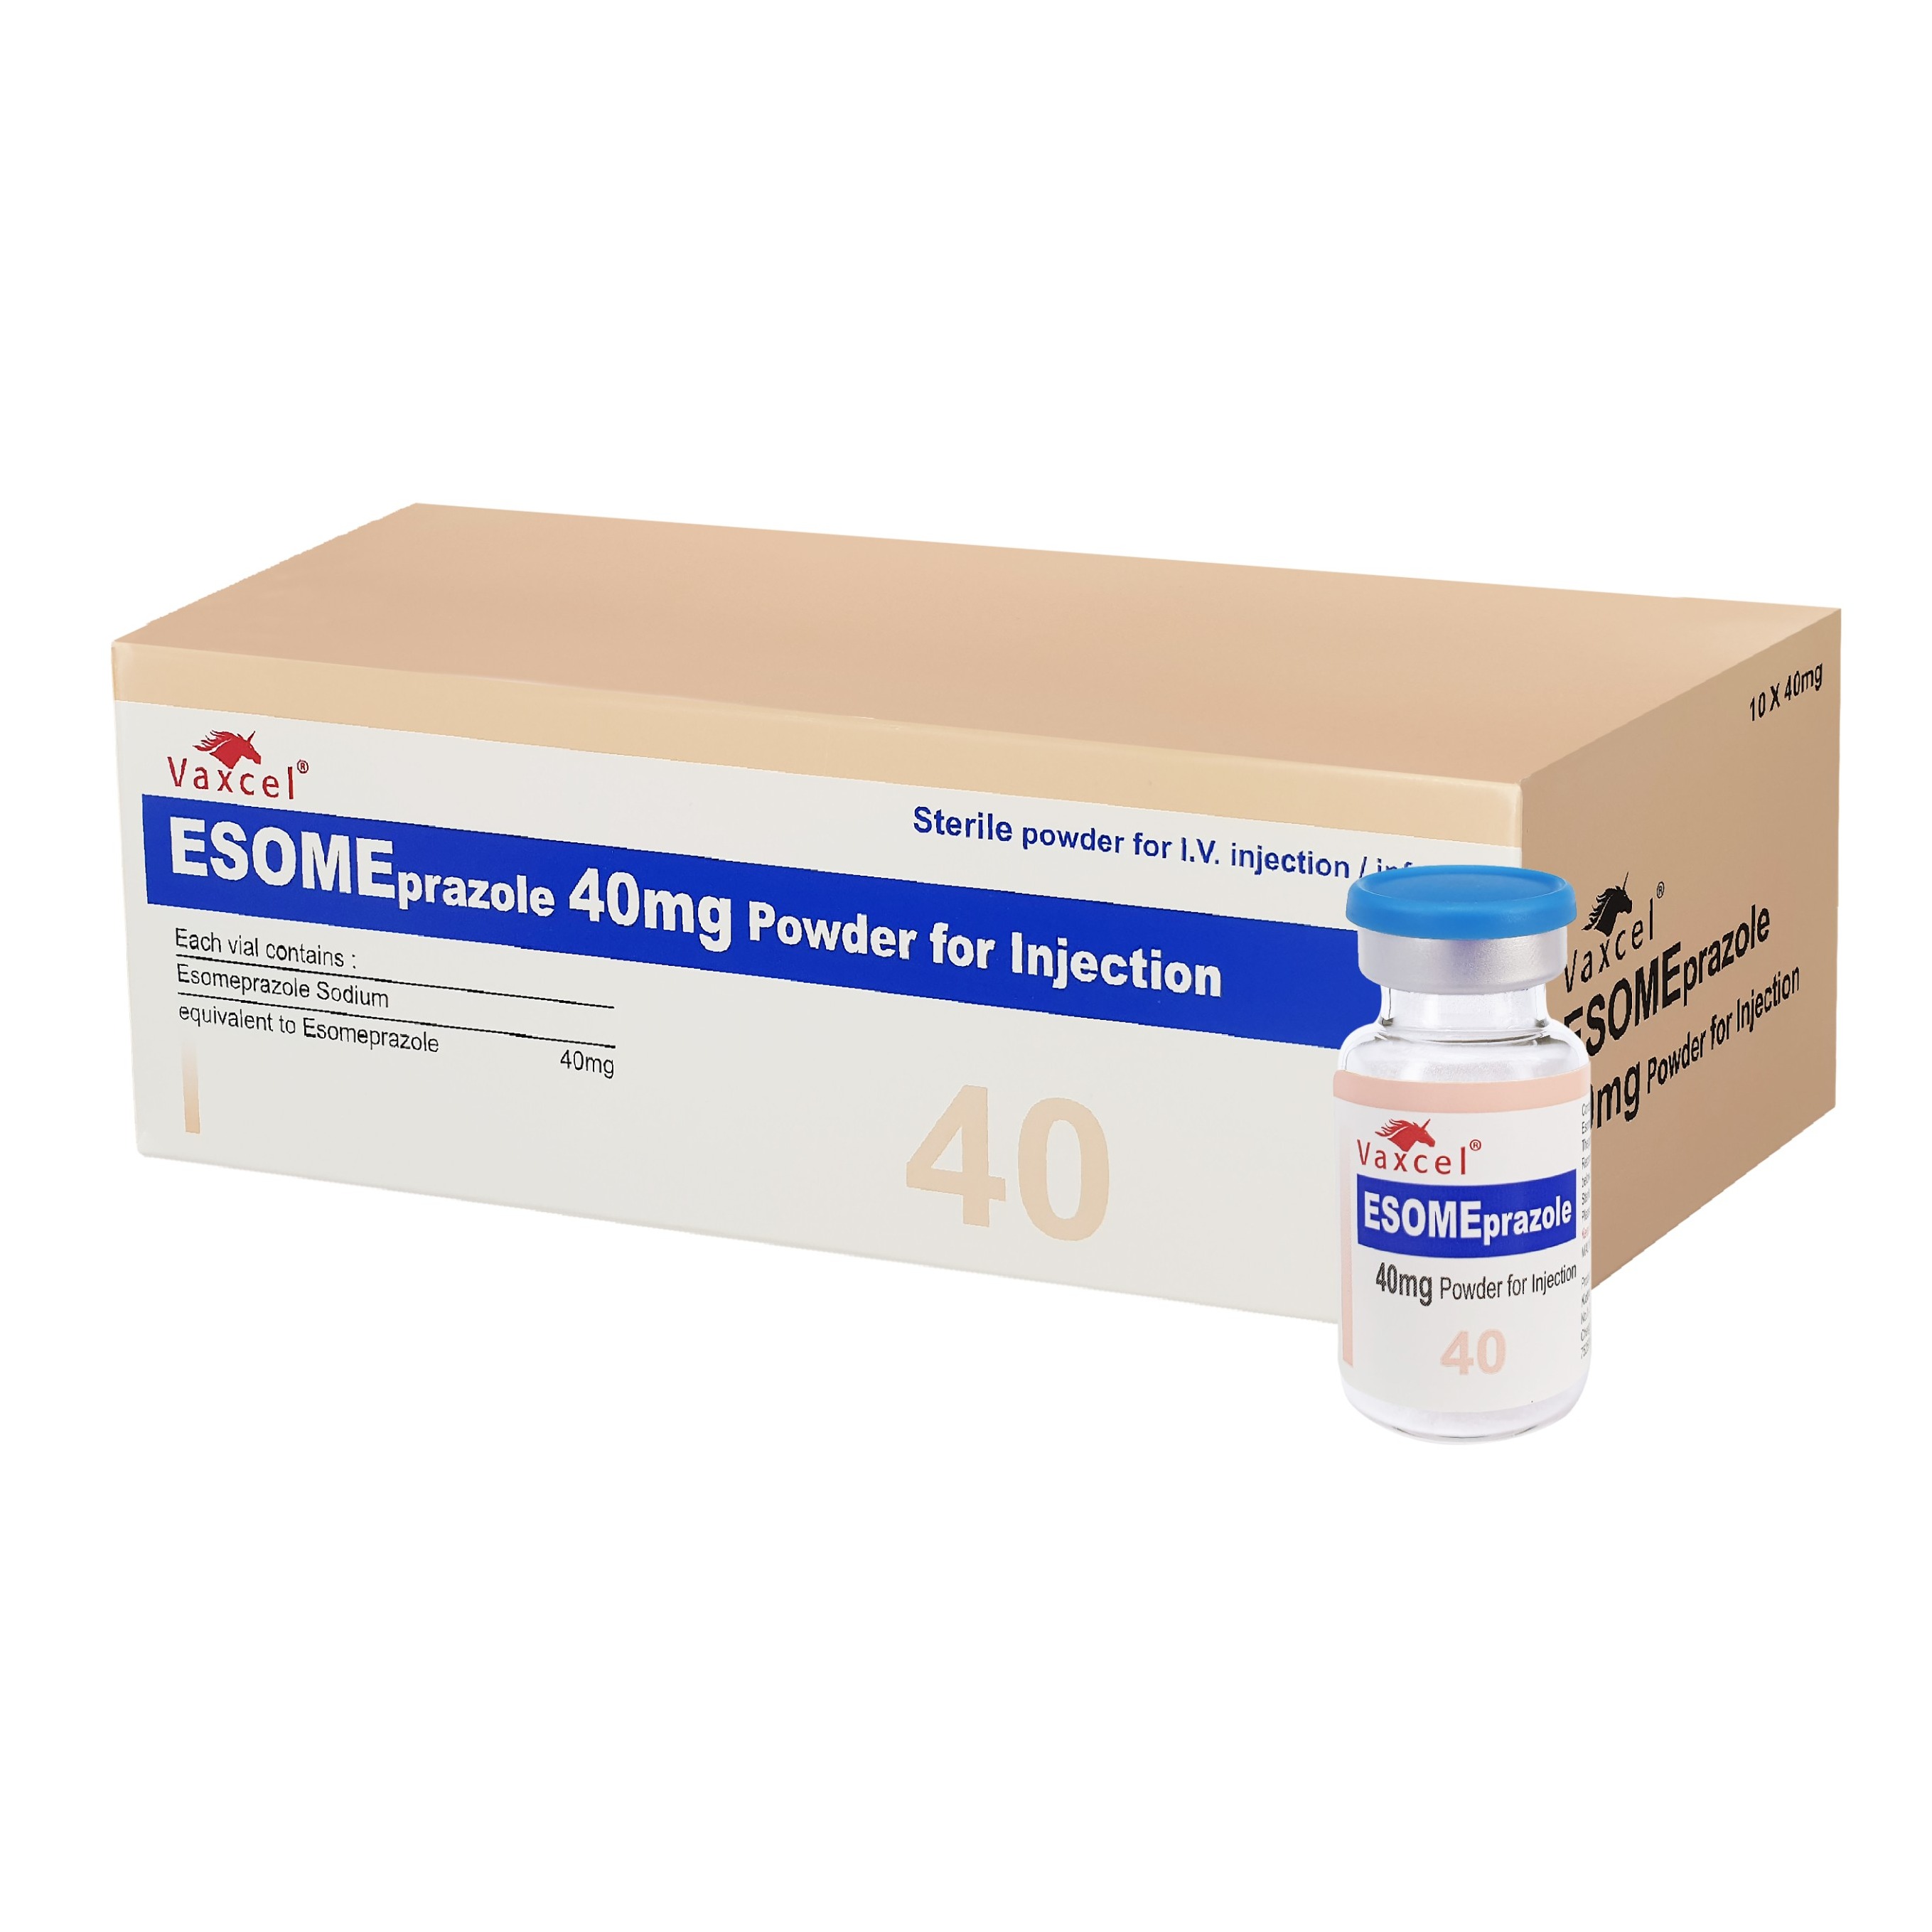 Vaxcel Esomeprazole 40mg Injection